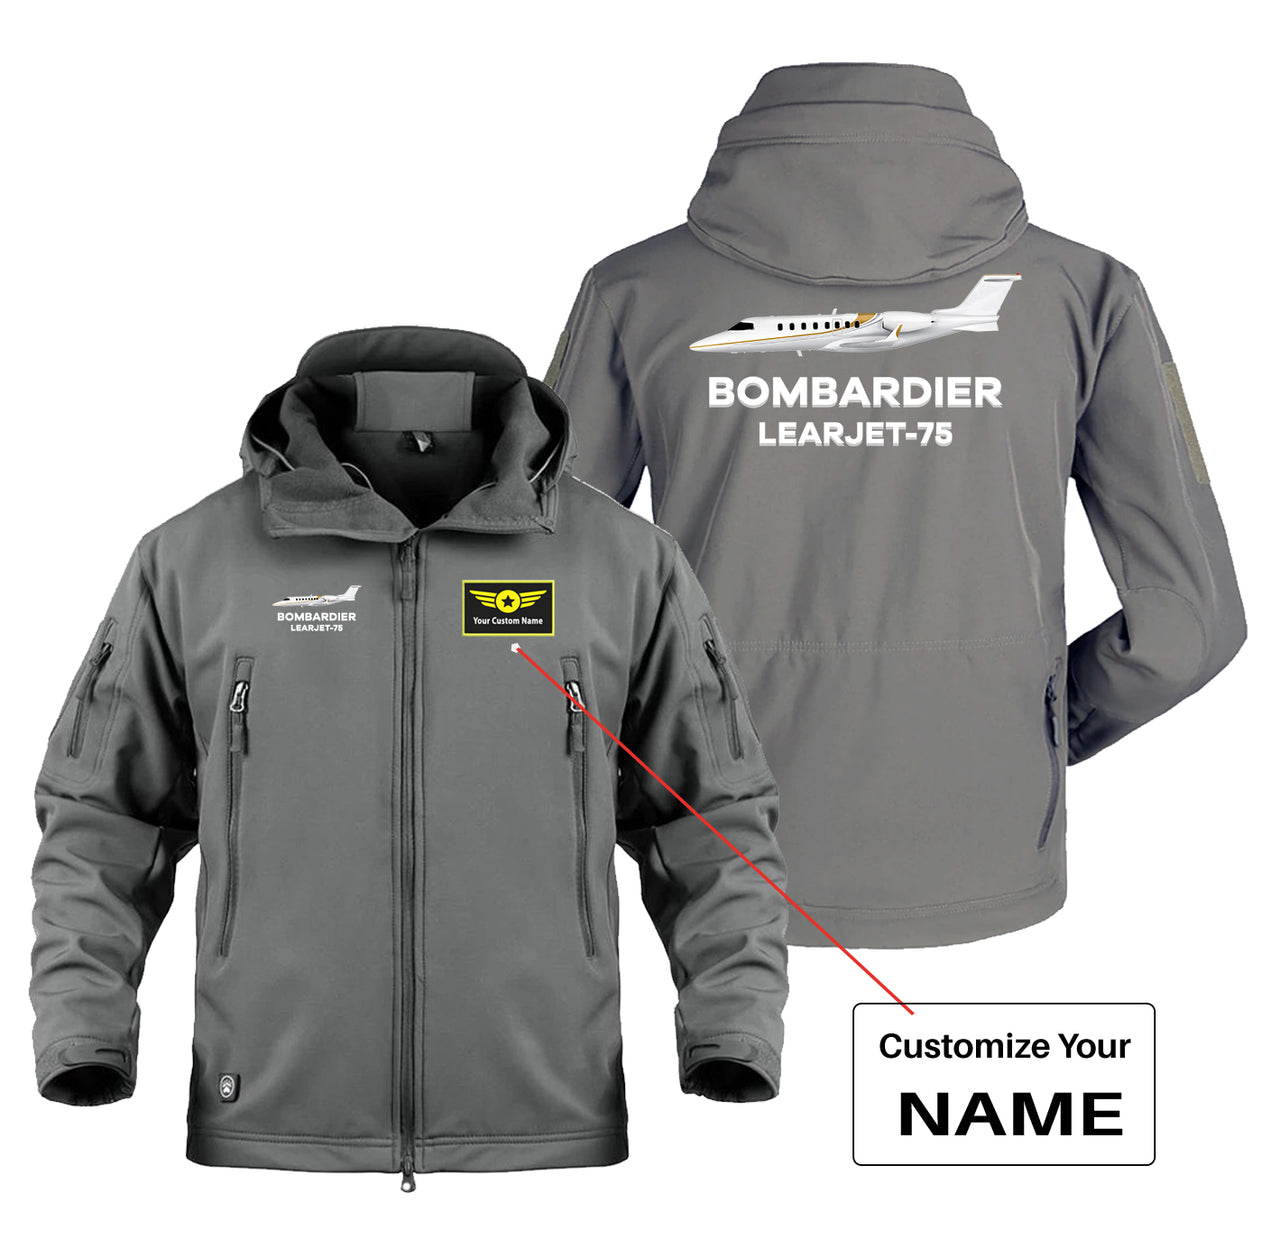 The Bombardier Learjet 75 Designed Military Jackets (Customizable)